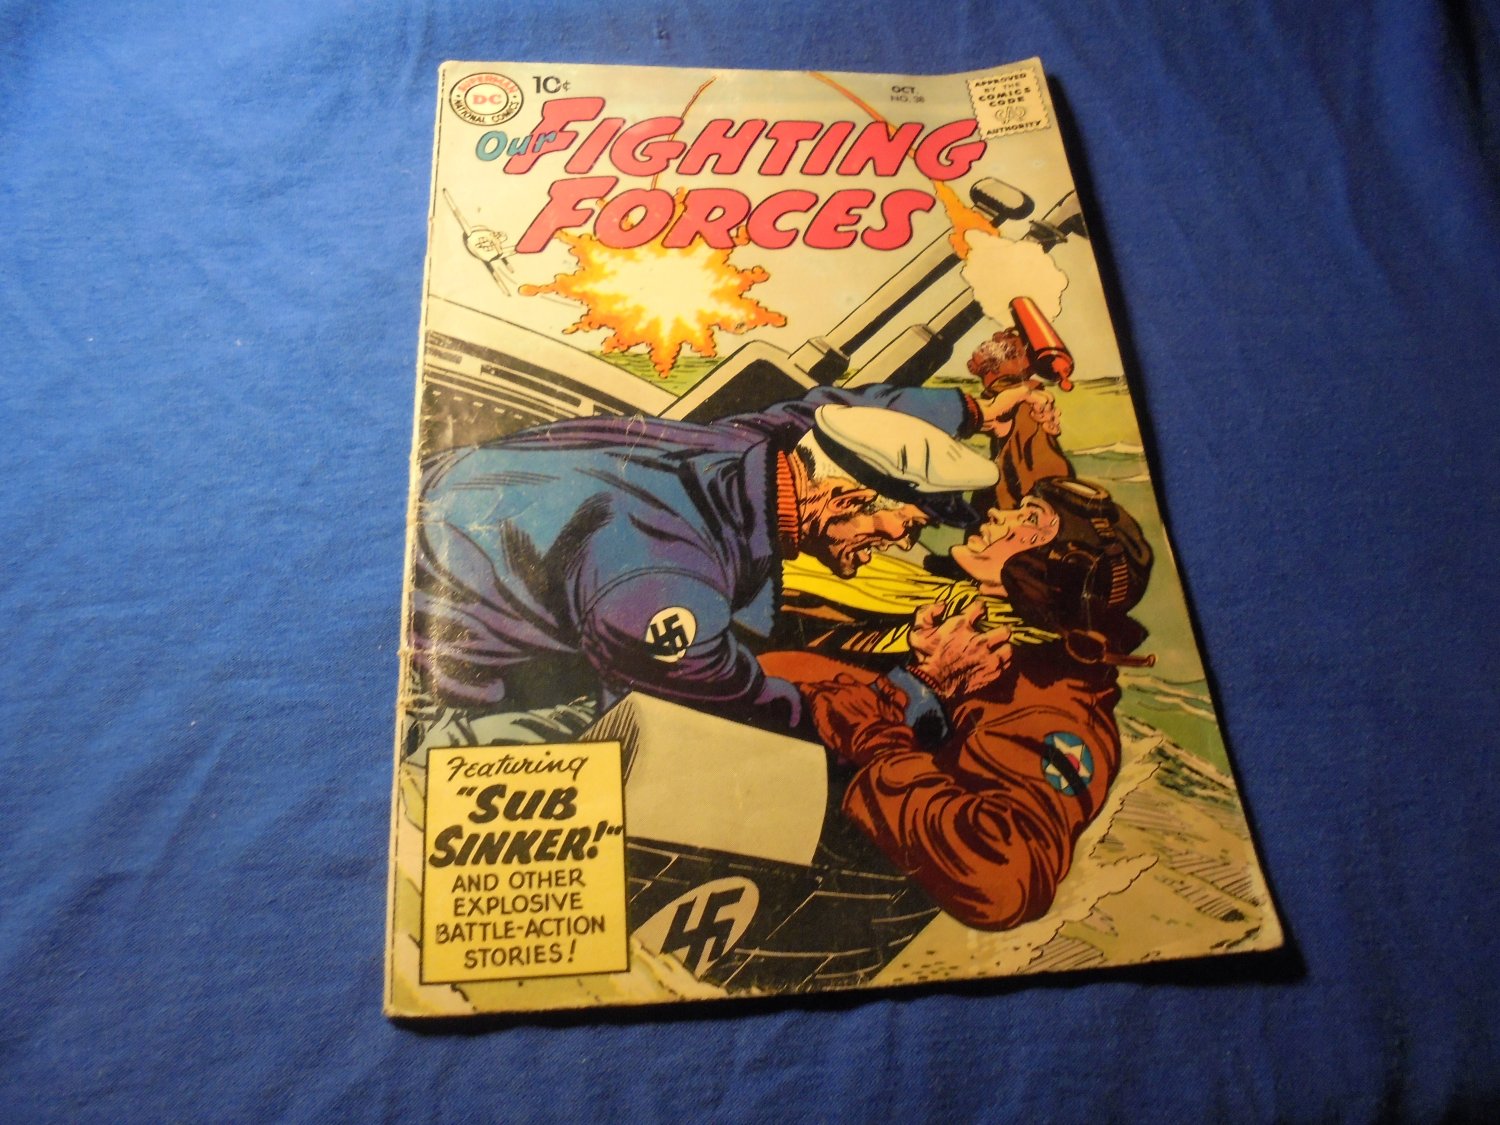 OUR FIGHTING FORCES # 38 - Oct. 1958 - GD - $20.00 obo!